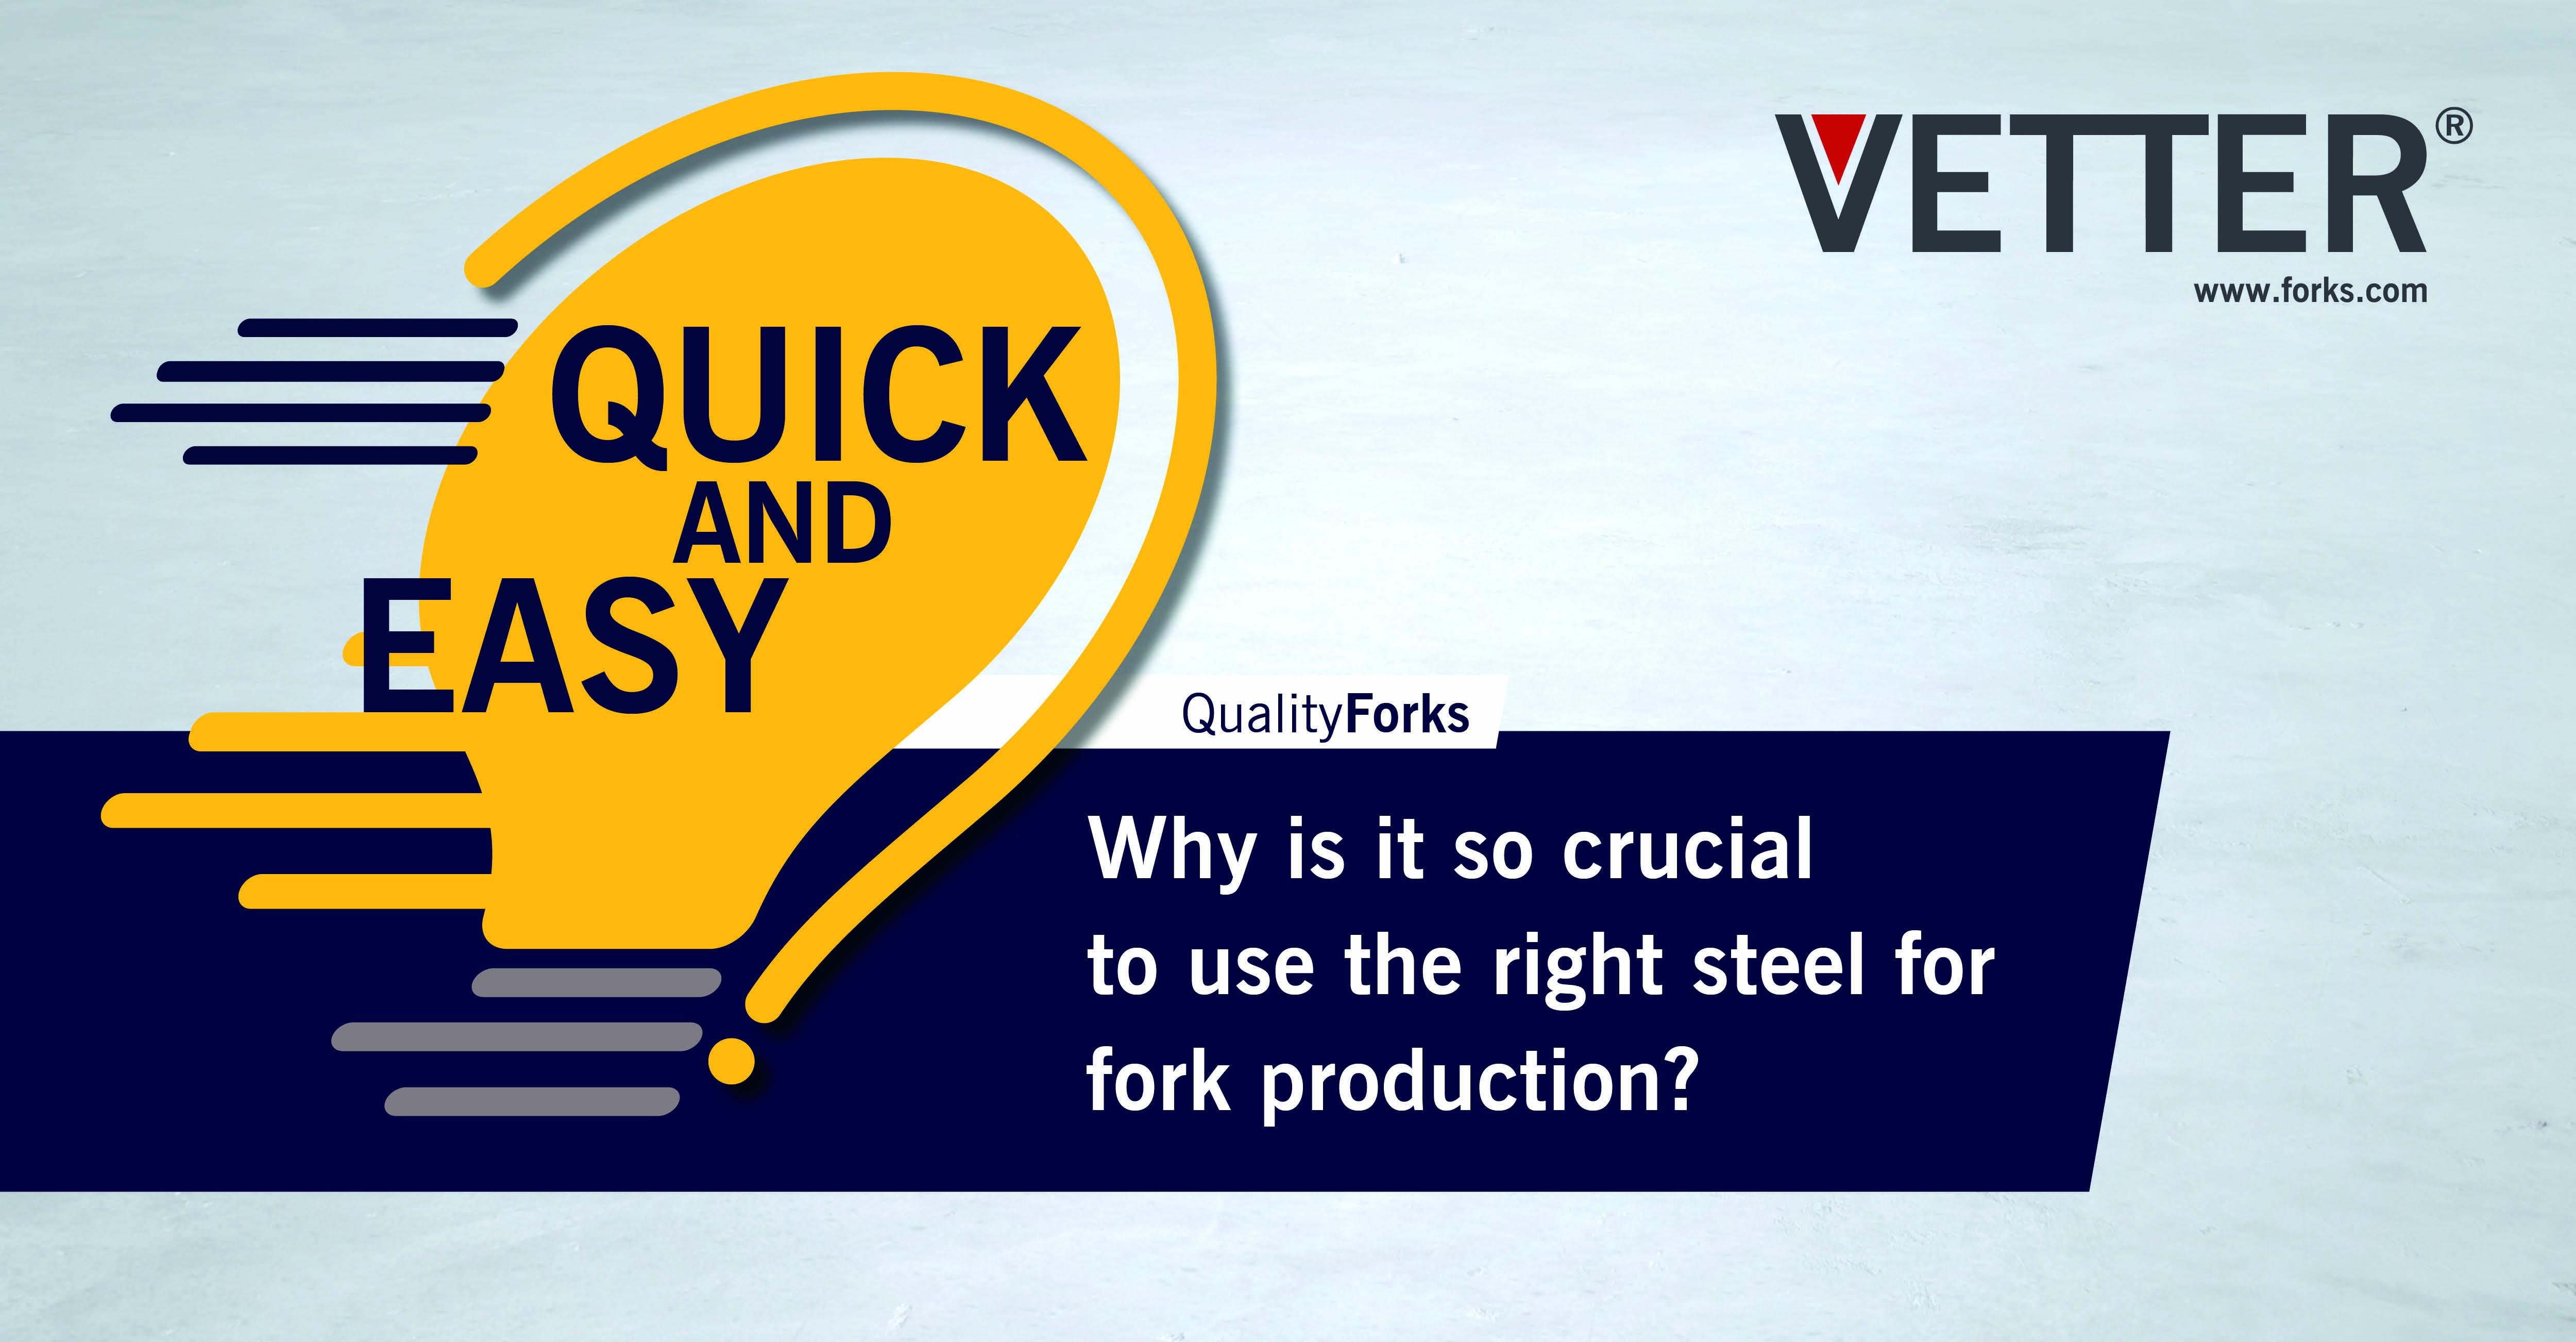 VETTER Quick and Easy: QualityForks